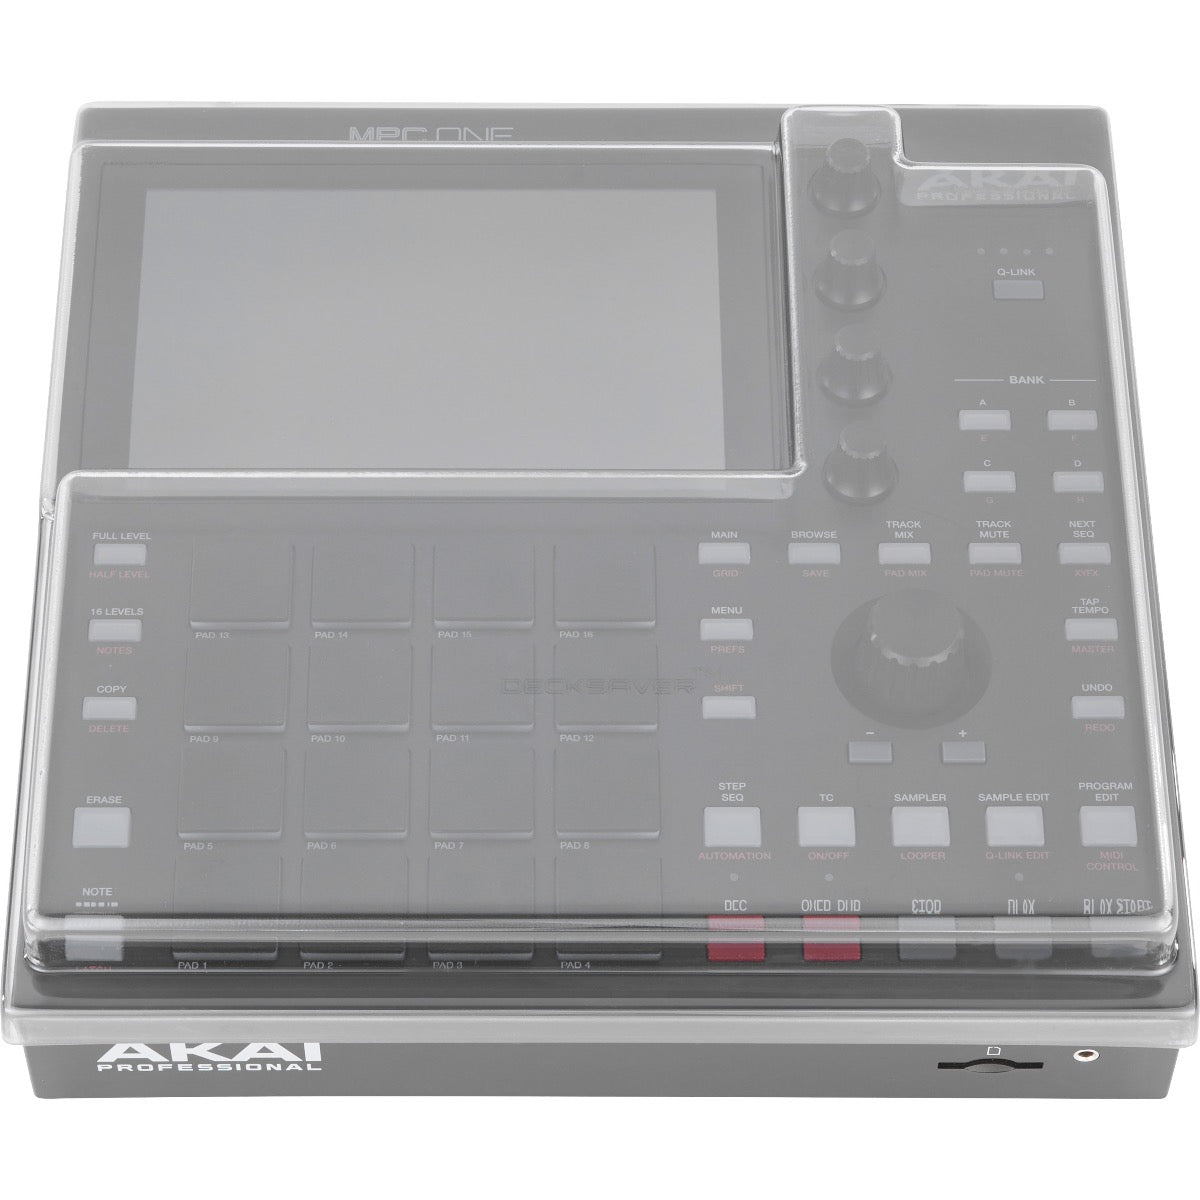 Perspective view of Decksaver Akai Professional MPC One Cover fitted onto Akai Professional MPC One (sold separately) showing top and front